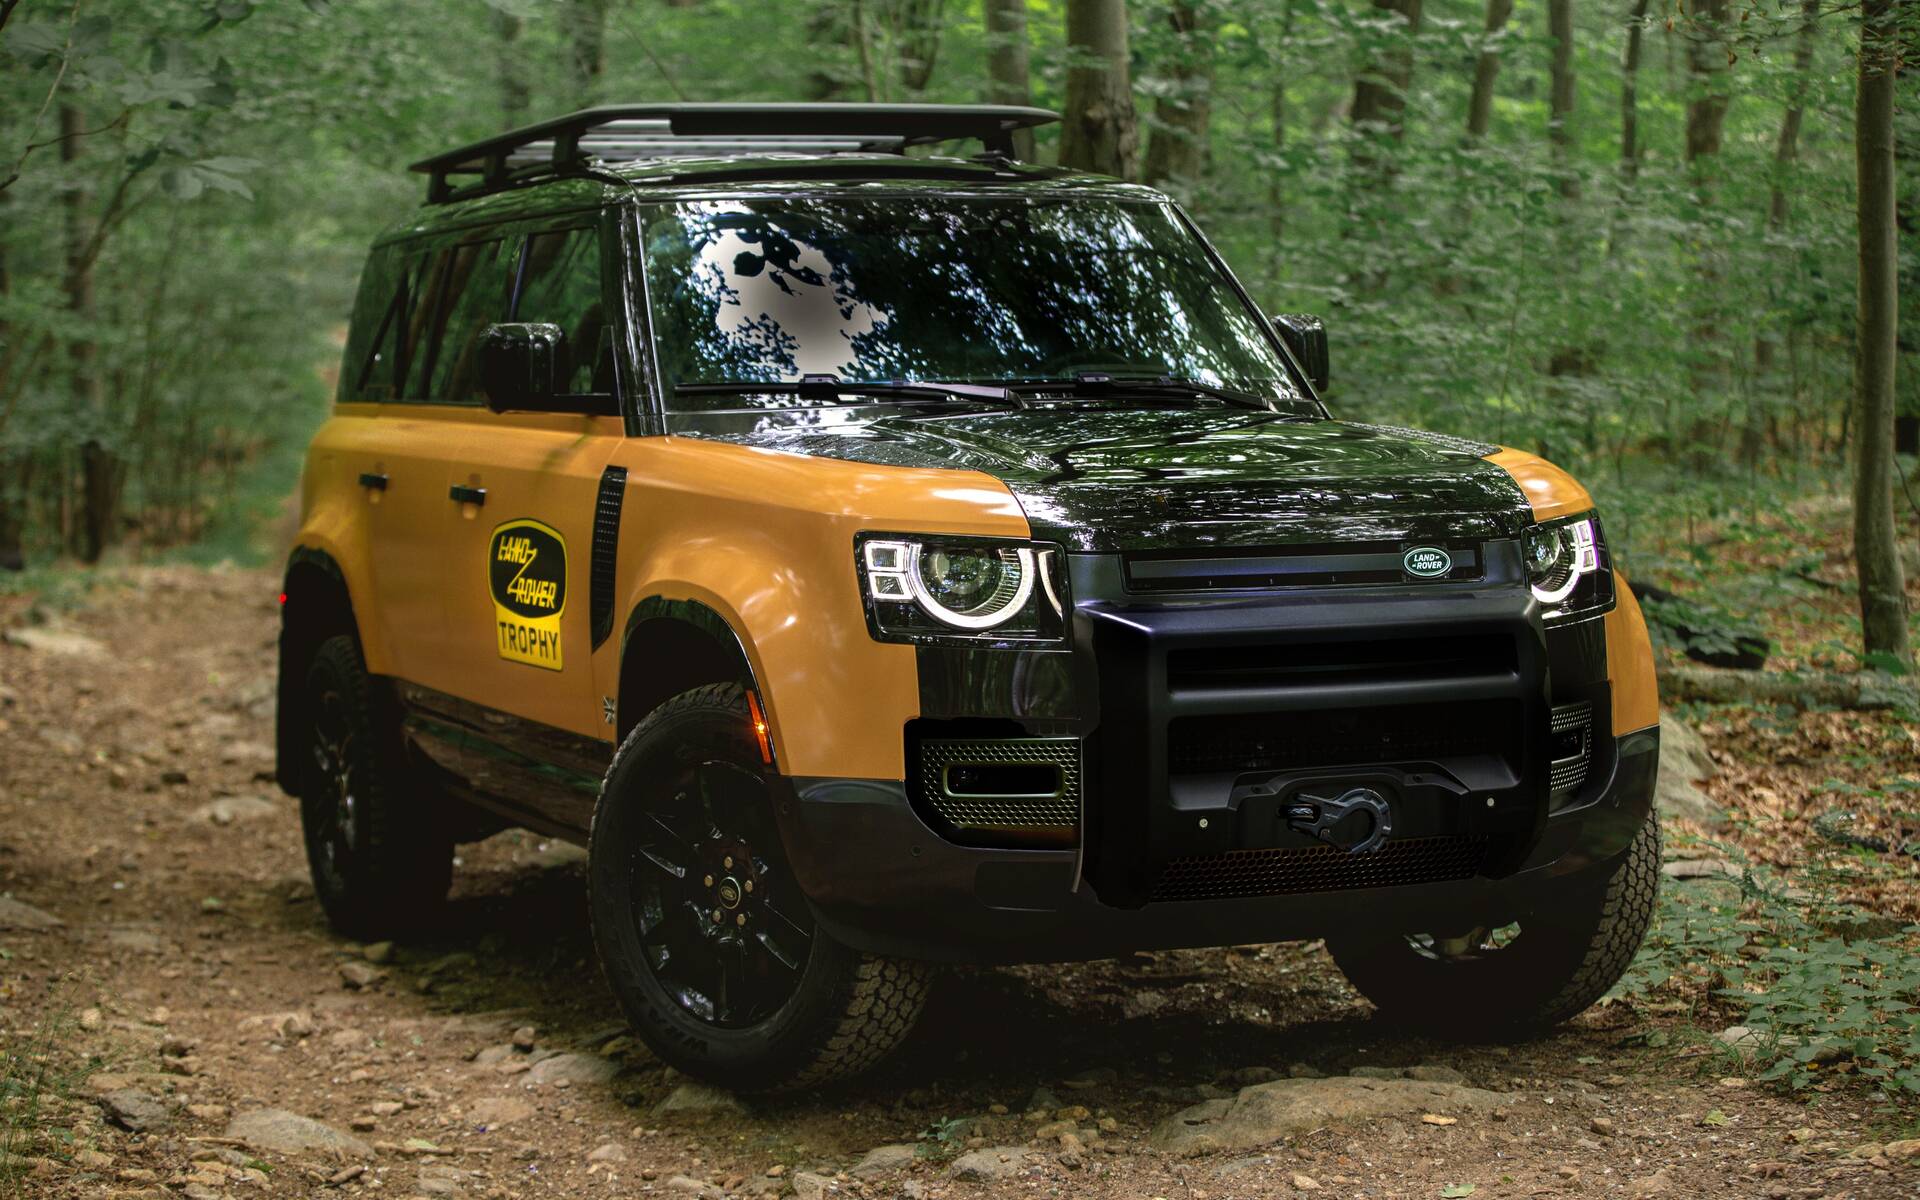 Land Rover Defender Trophy Edition Aimed at Select Adventurers The